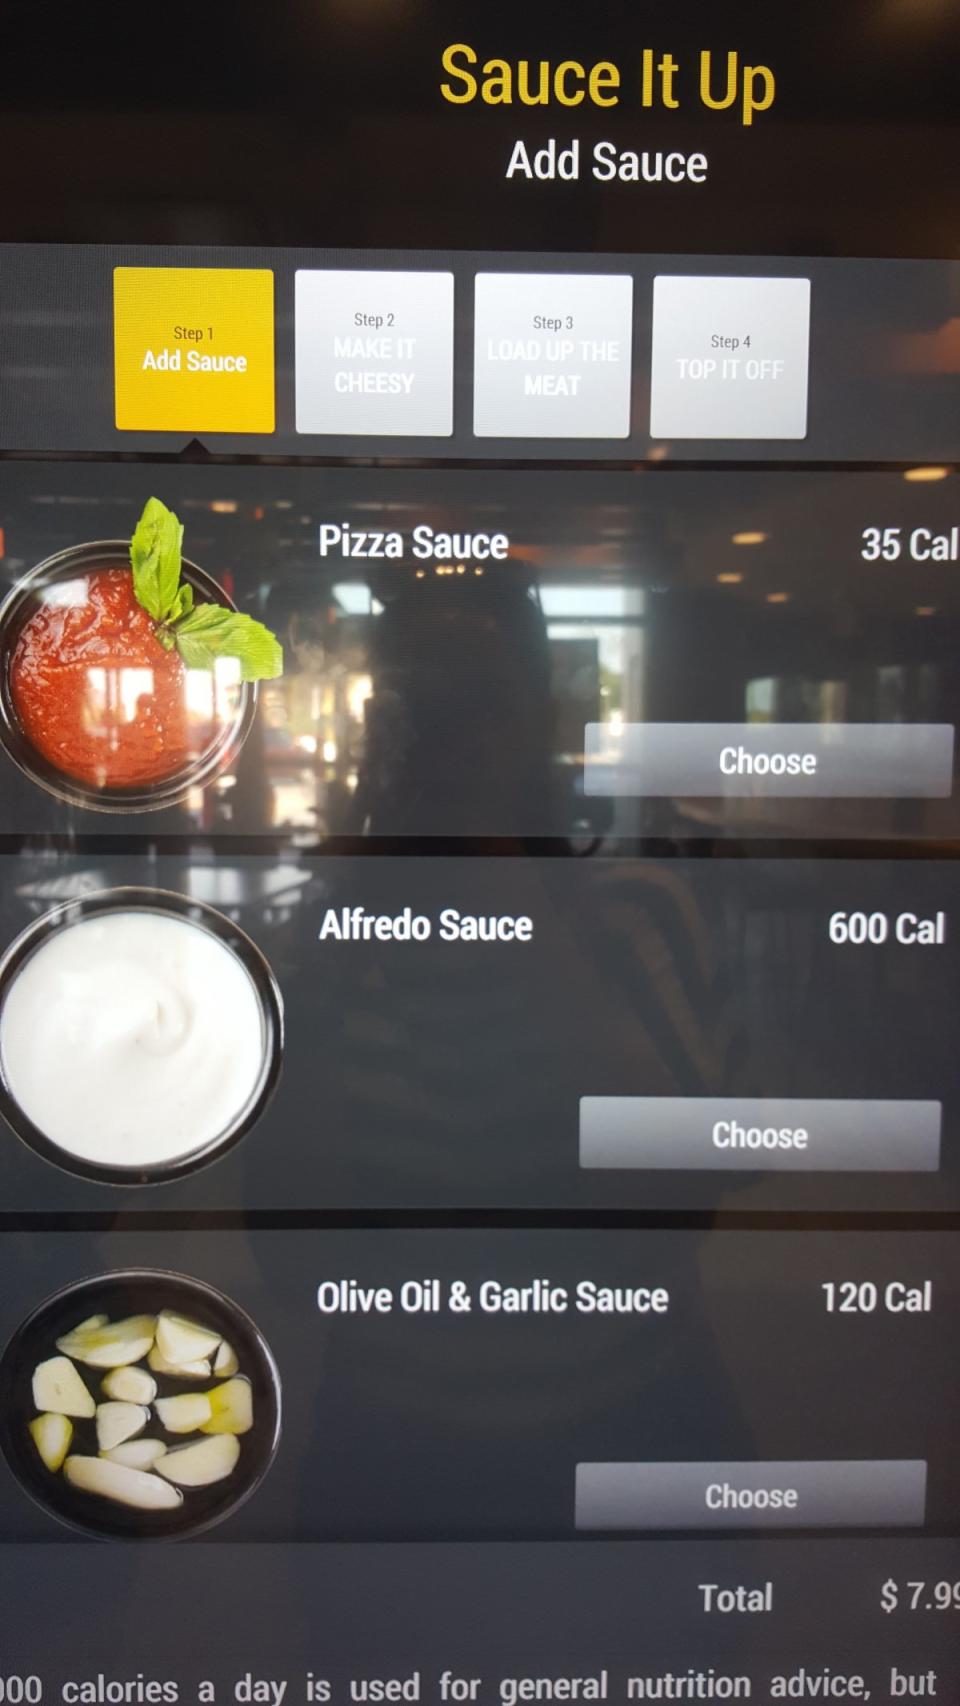 <p>The pizza ordering reminded me a bit of Pizza Hut’s build-your-own pizza system online. You have your choice of sauces, cheeses (mozzarella or a cheddar blend), meat (chicken, bacon, sausage, or Canadian bacon), and other toppings. </p>